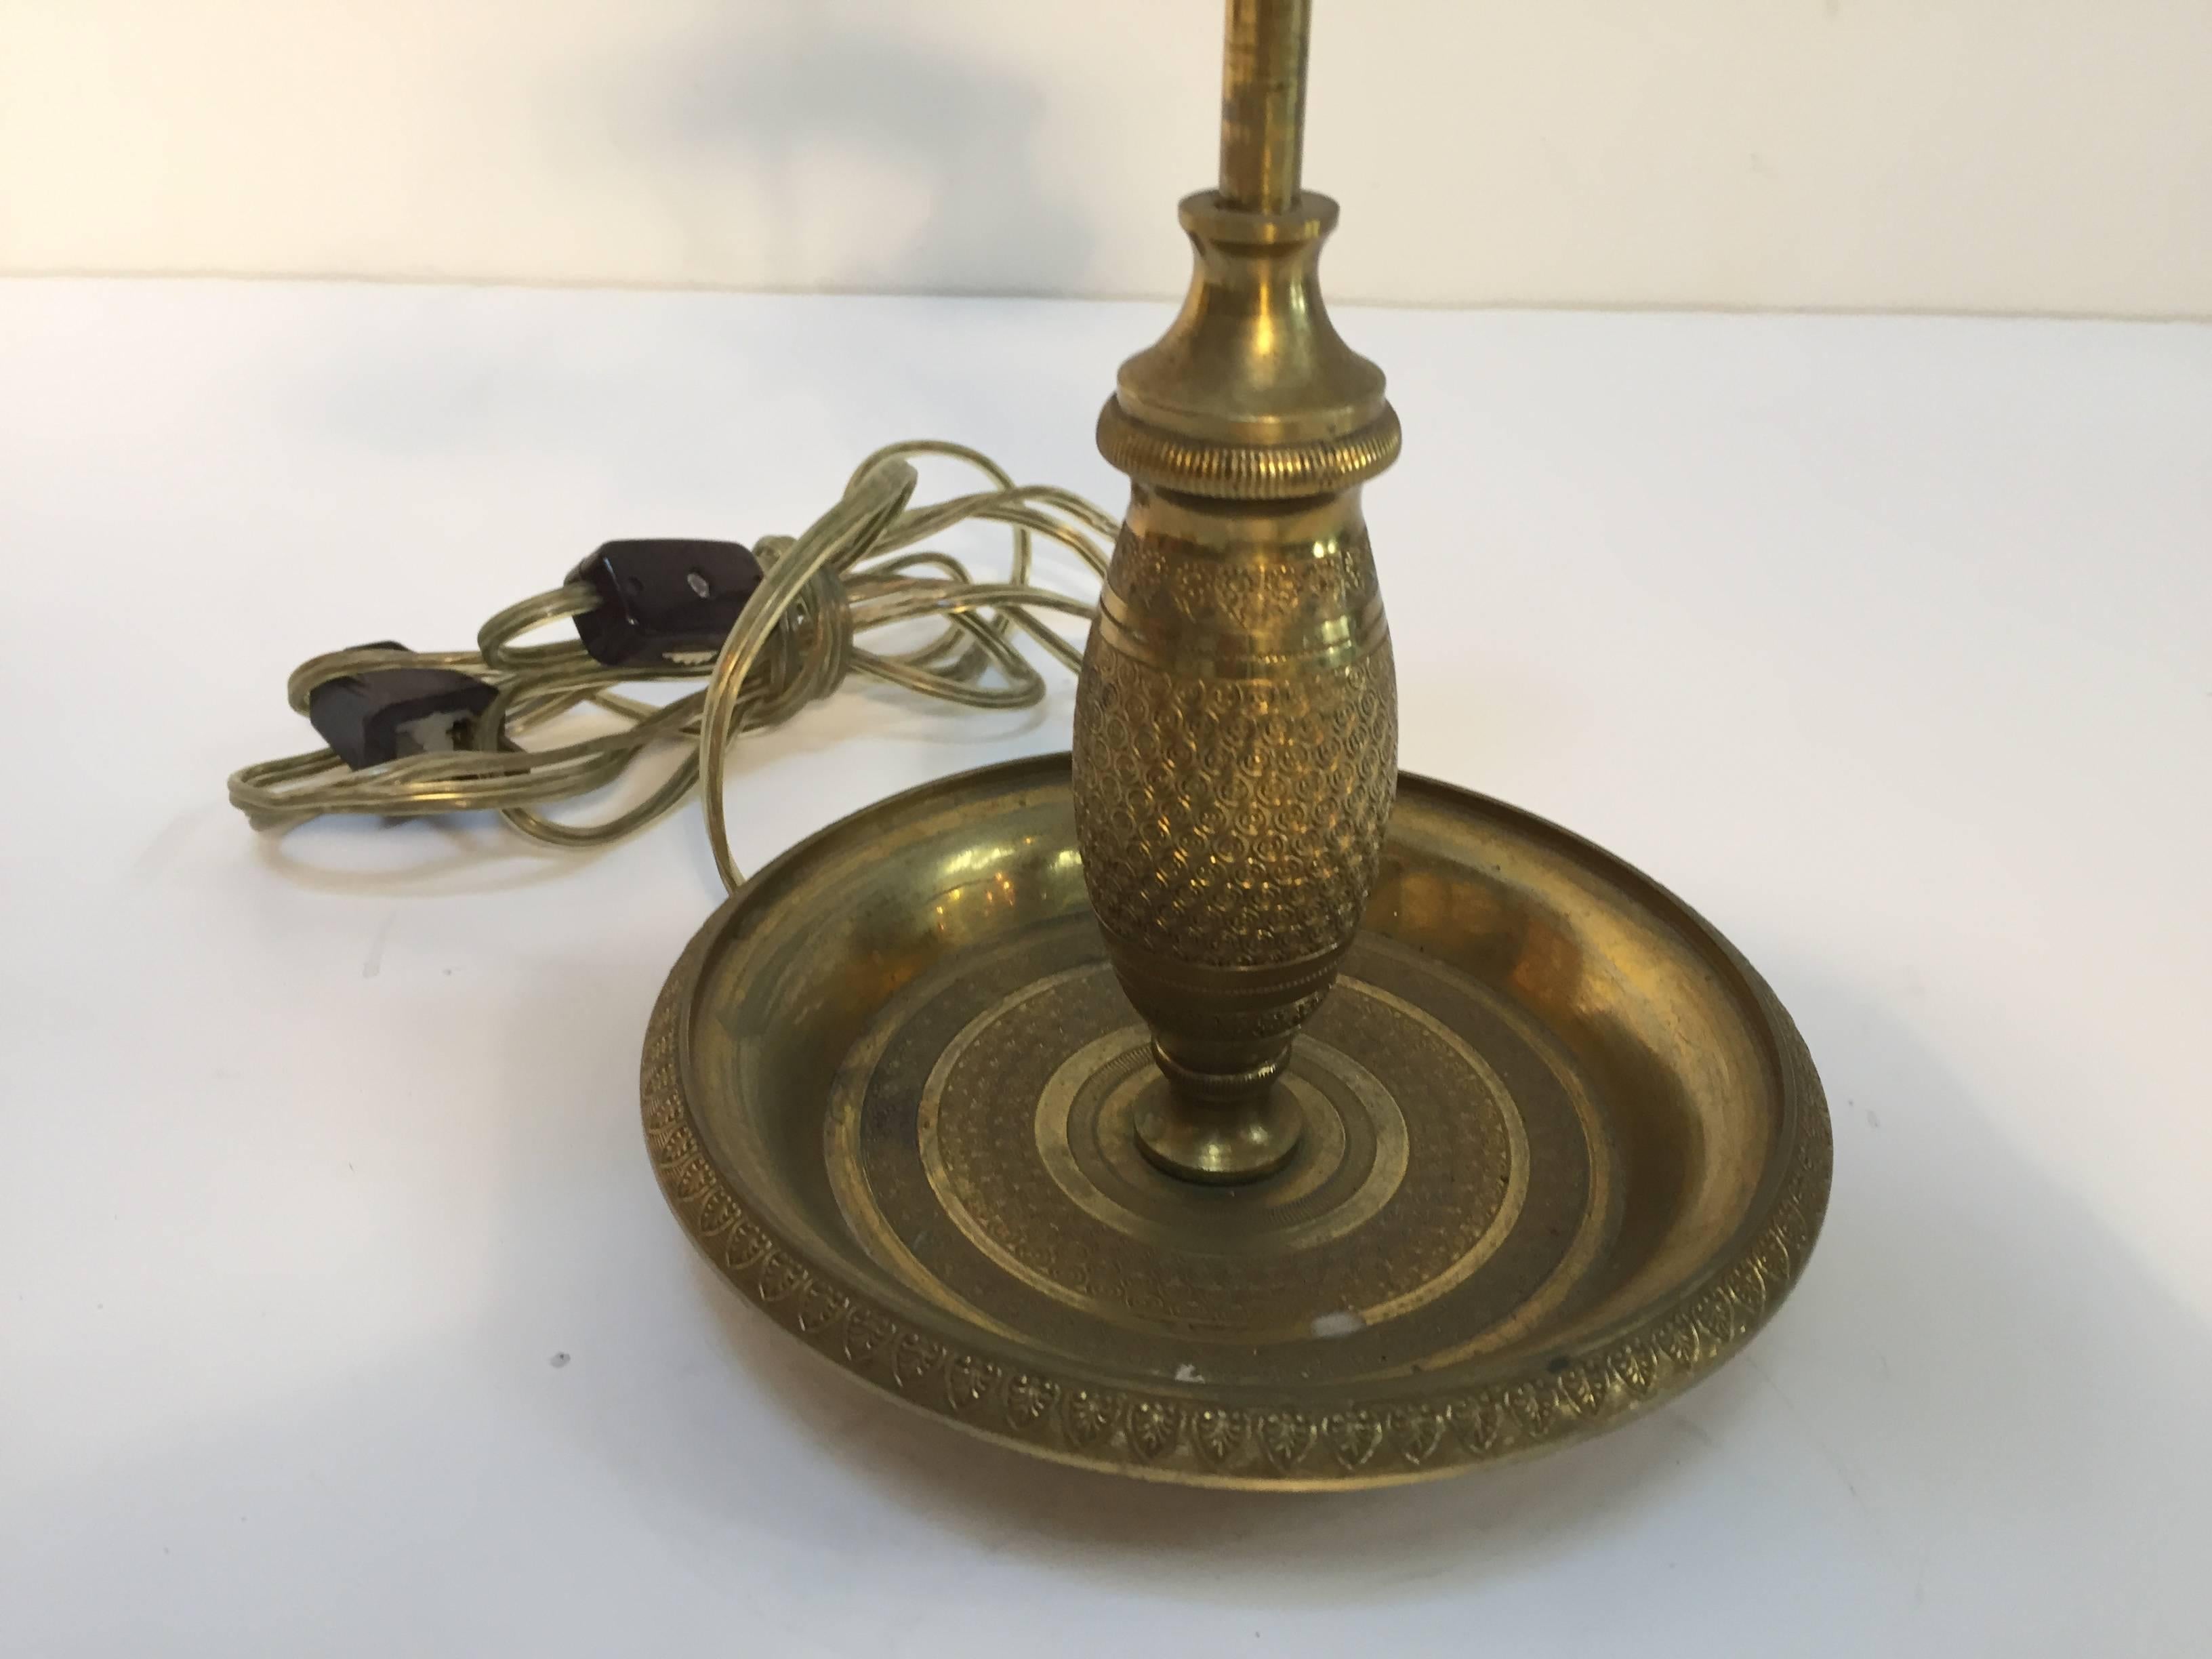 Late 19th century French antique brass candelabra converted into a table lamp.
Three candleholders in brass, nice hammered designs.
Candle height is adjustable.
The candleholders are in form of a swan head holding the brass plate.
The final is